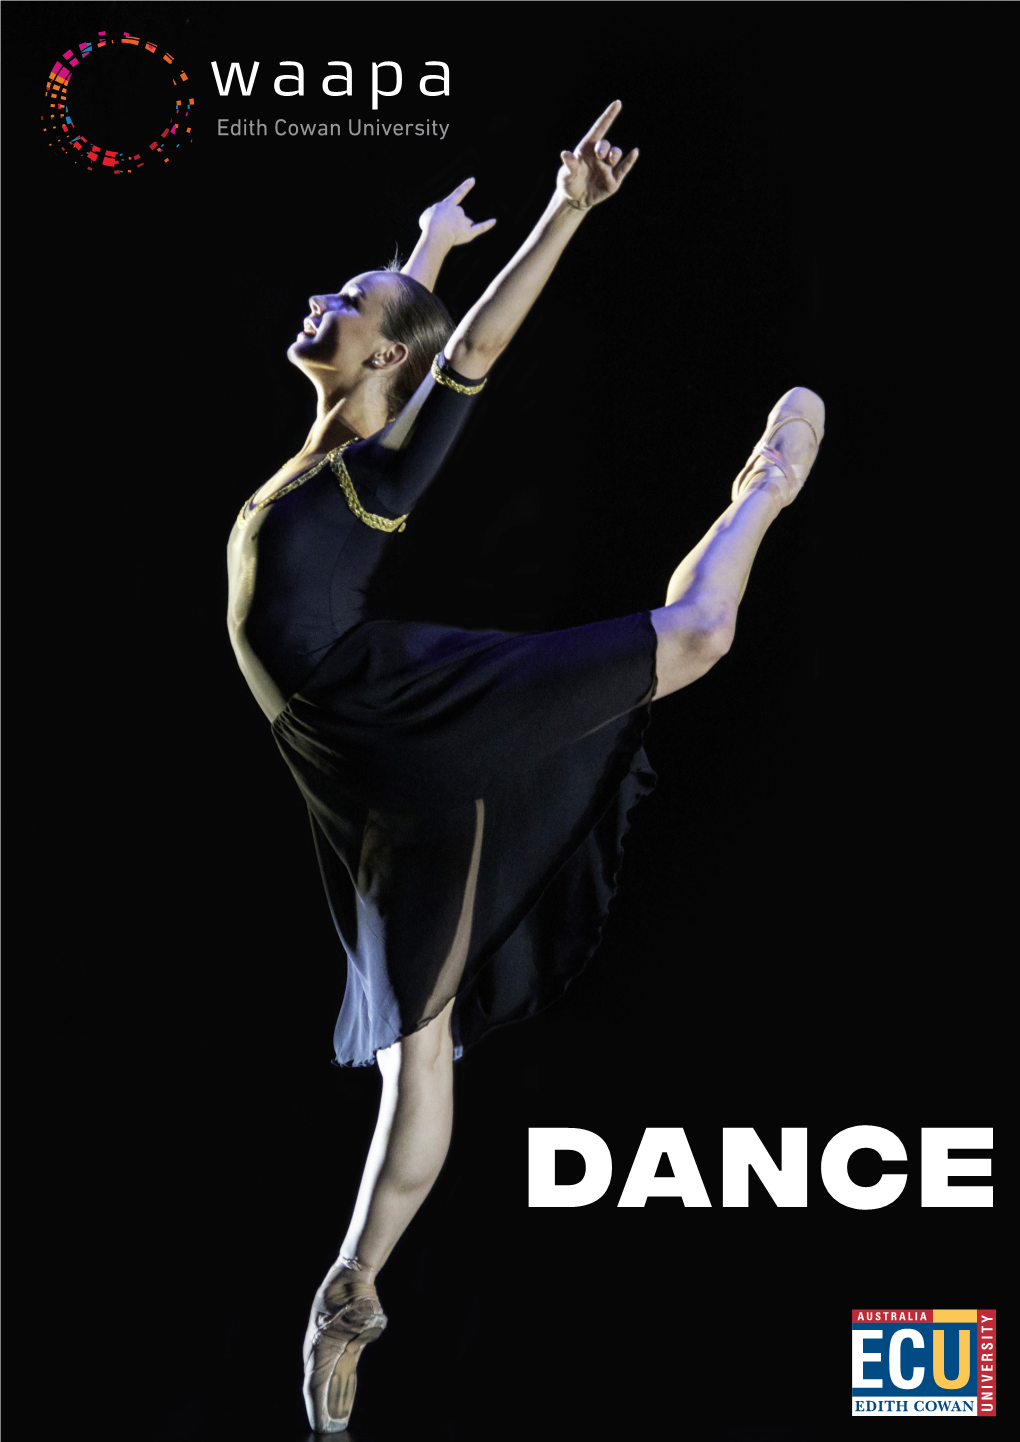 Study Dance at the Western Australian Academy of Performing Arts